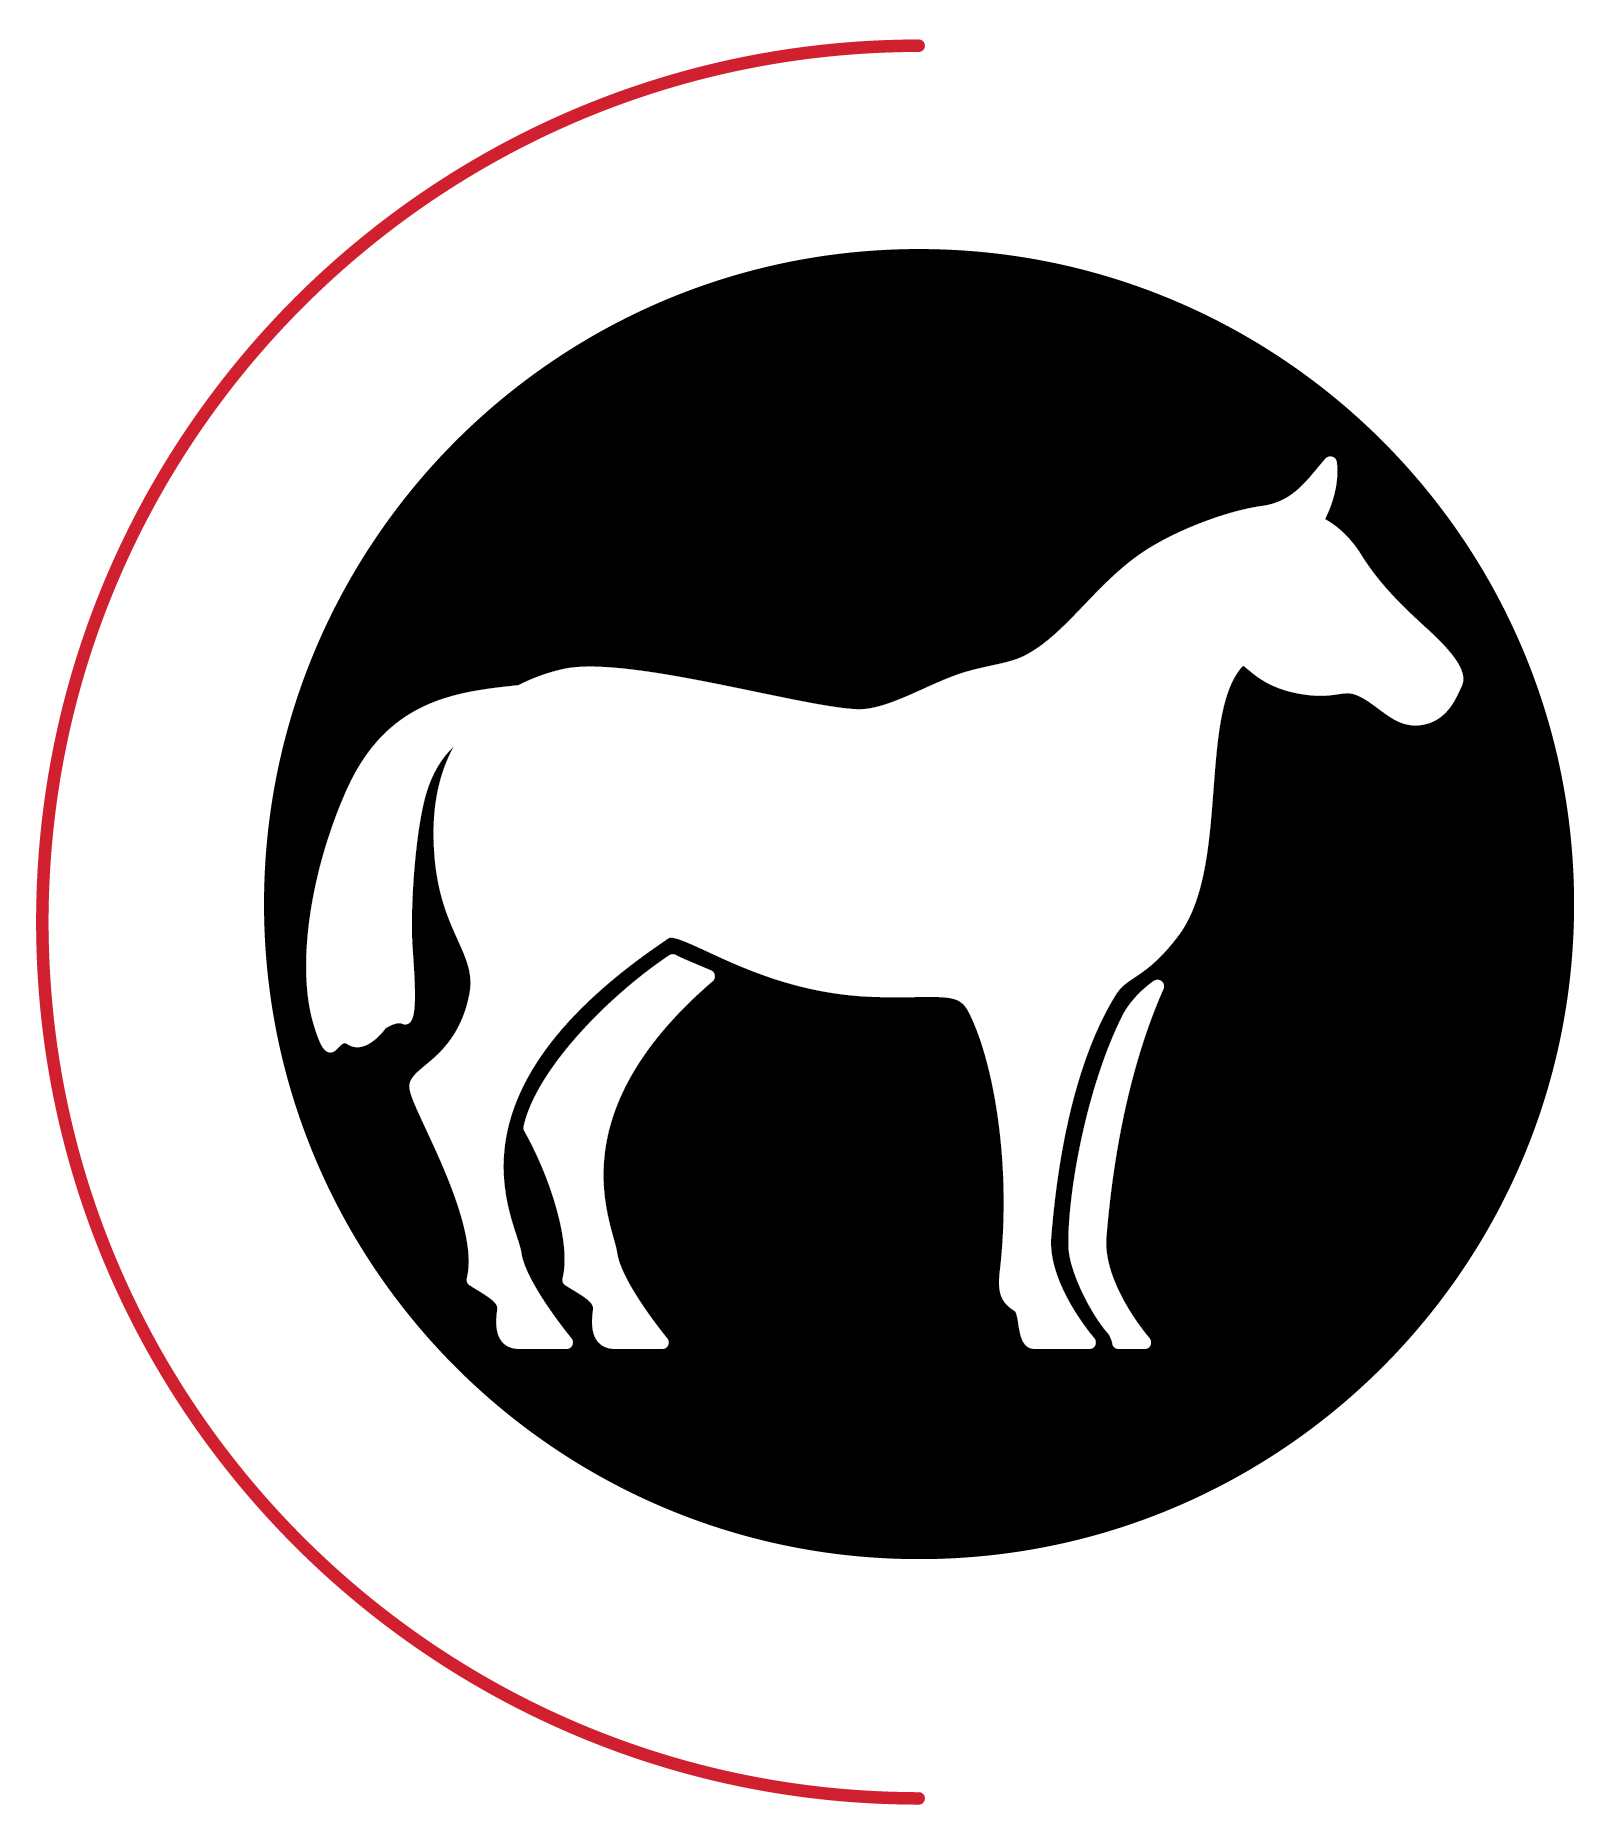 equine products